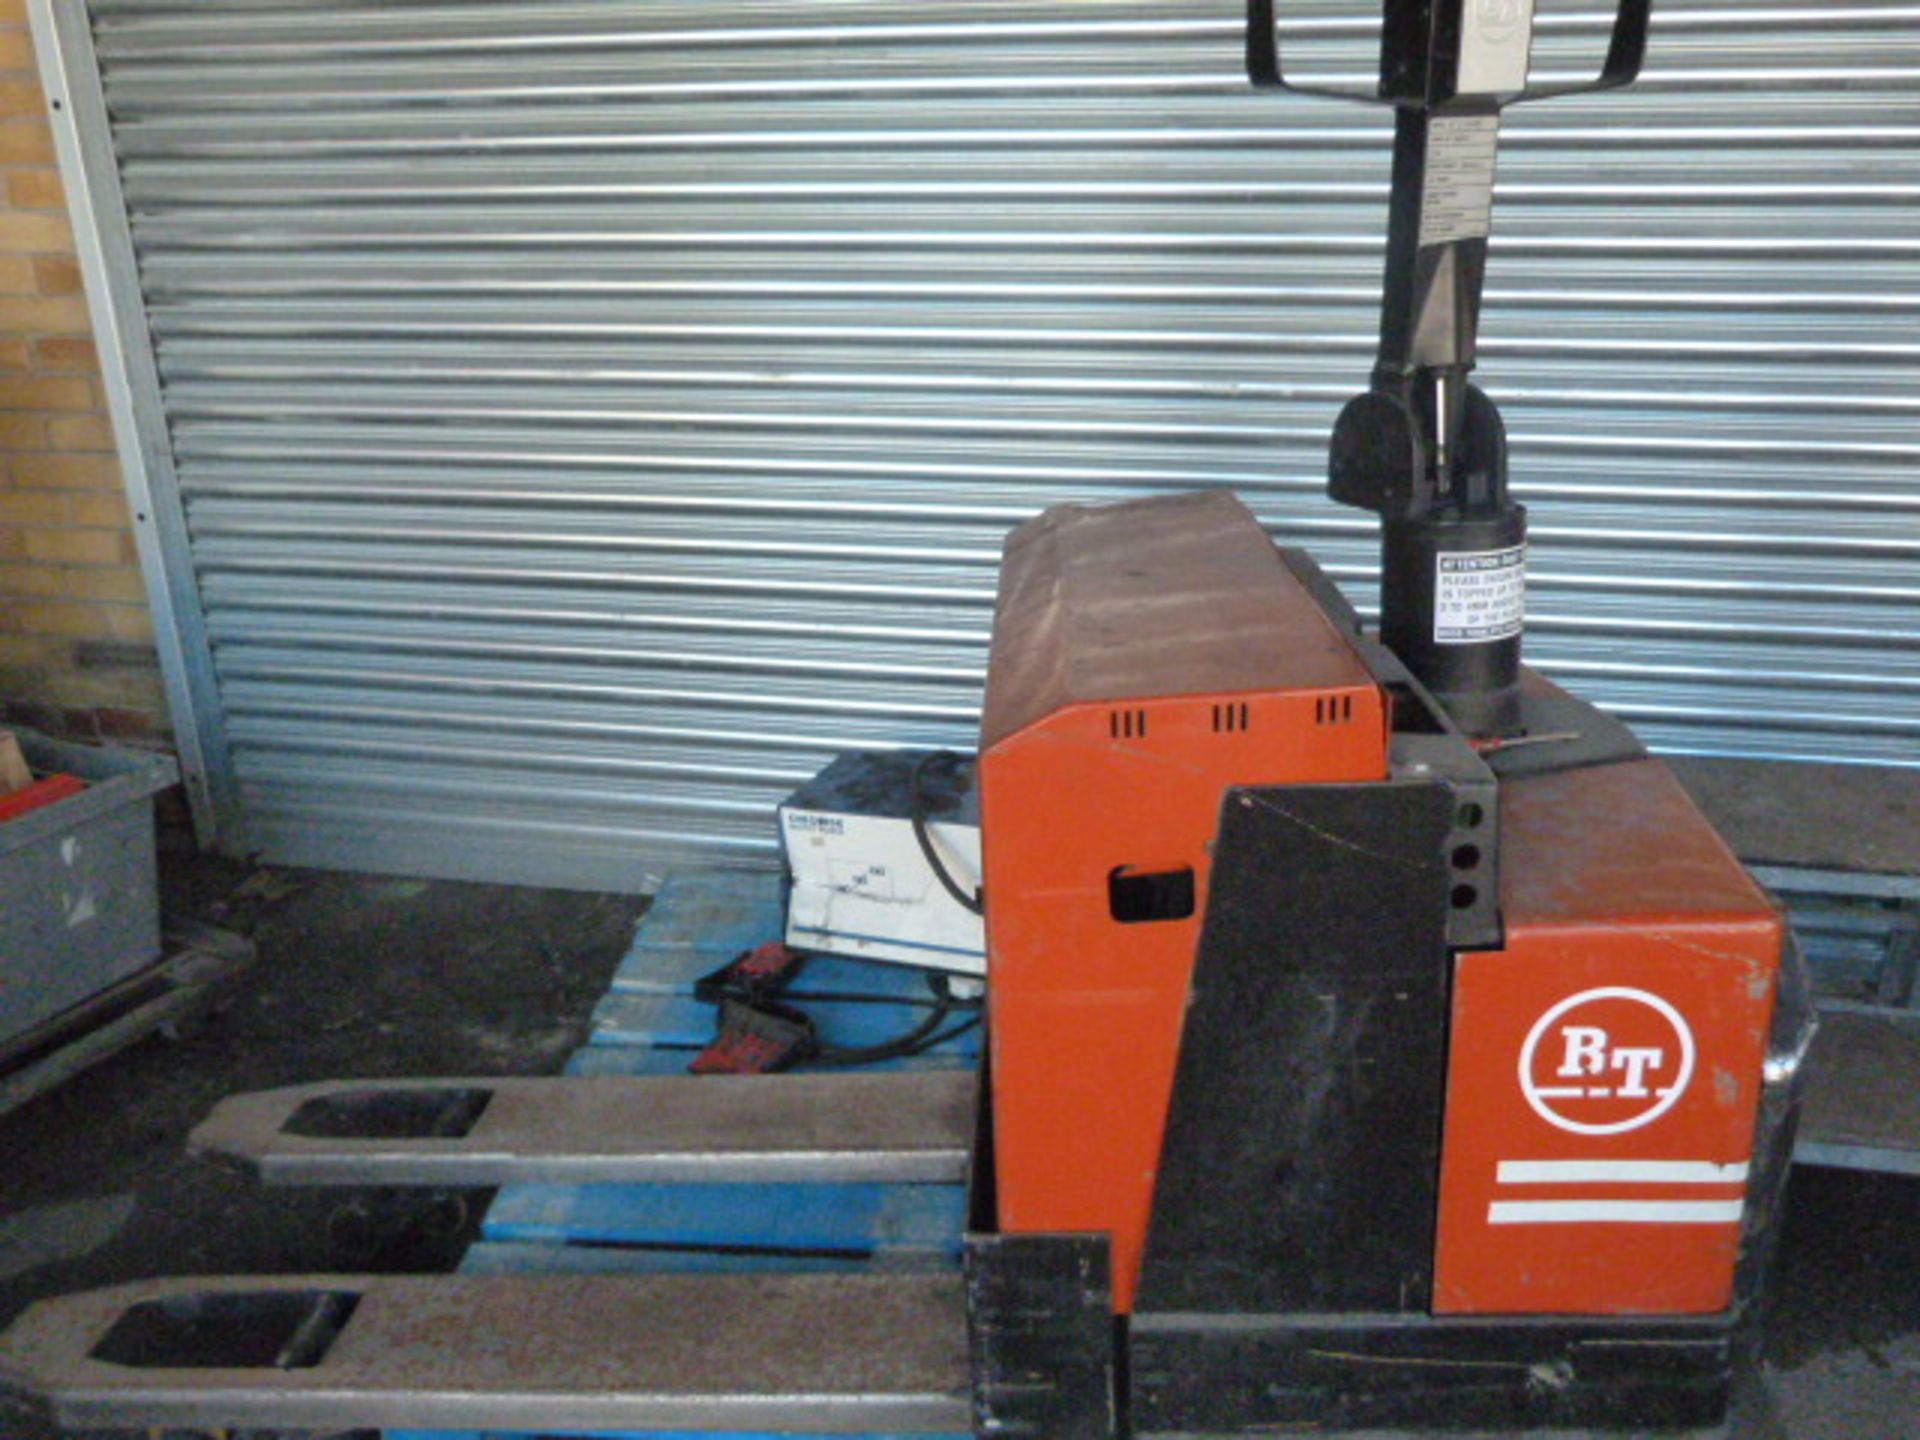 *BTL TR2000e Electric Pallet Truck with Charger